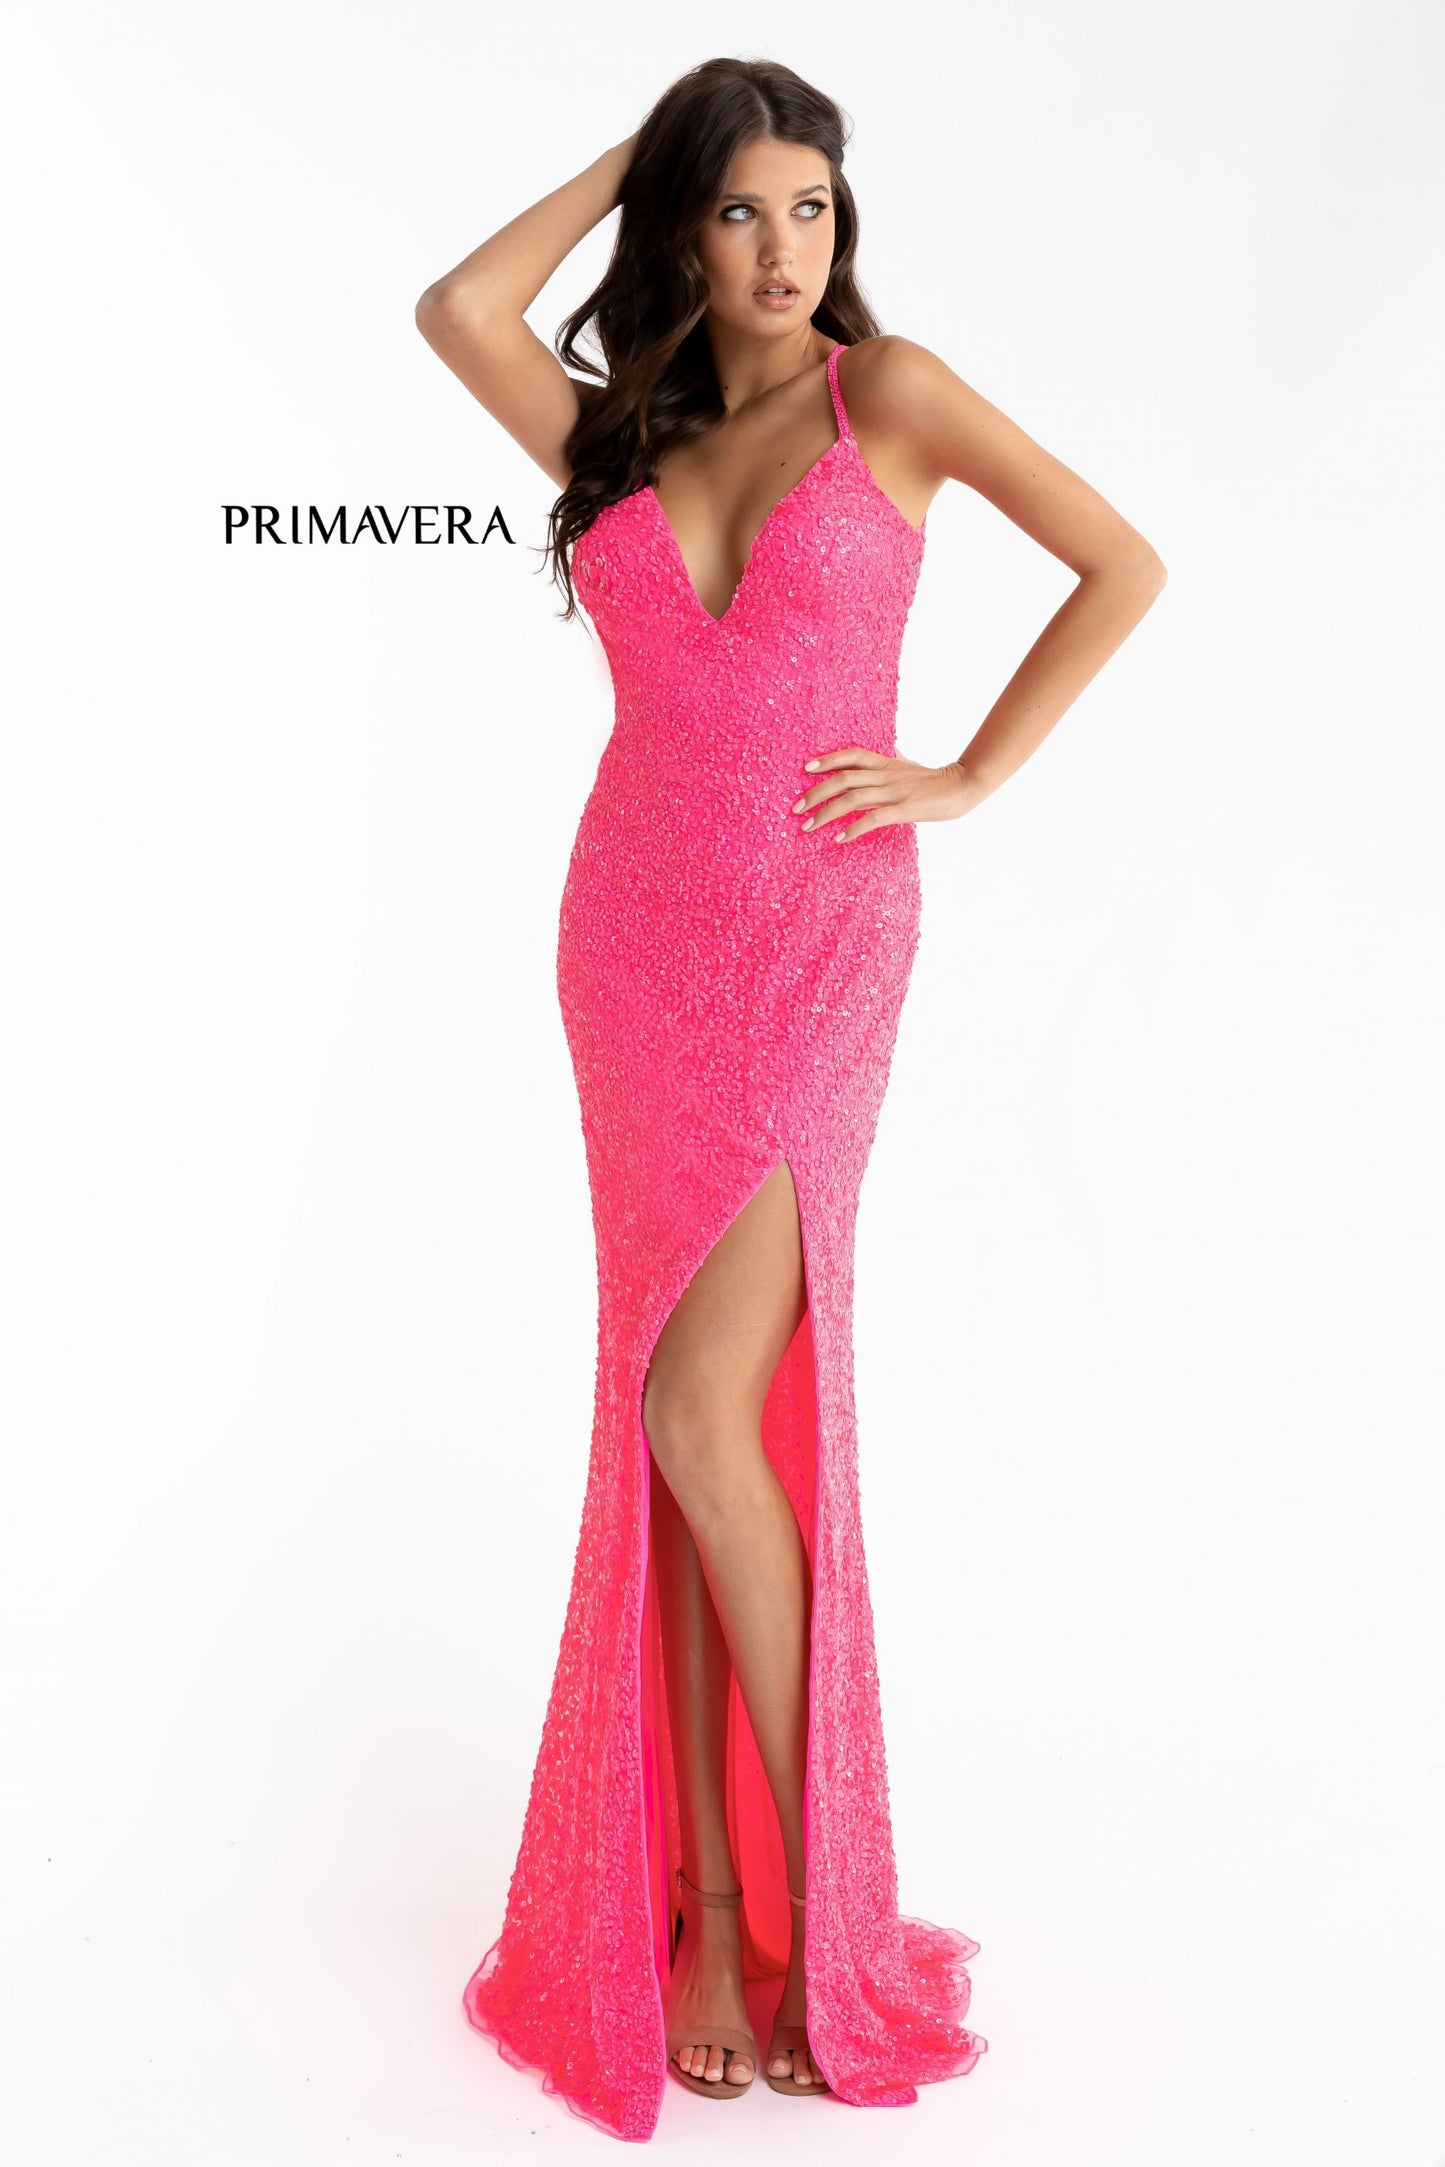 Primavera Couture 3291 Size 6 Ivory Prom Dress Long Fitted Backless Sequin Formal Evening Gown